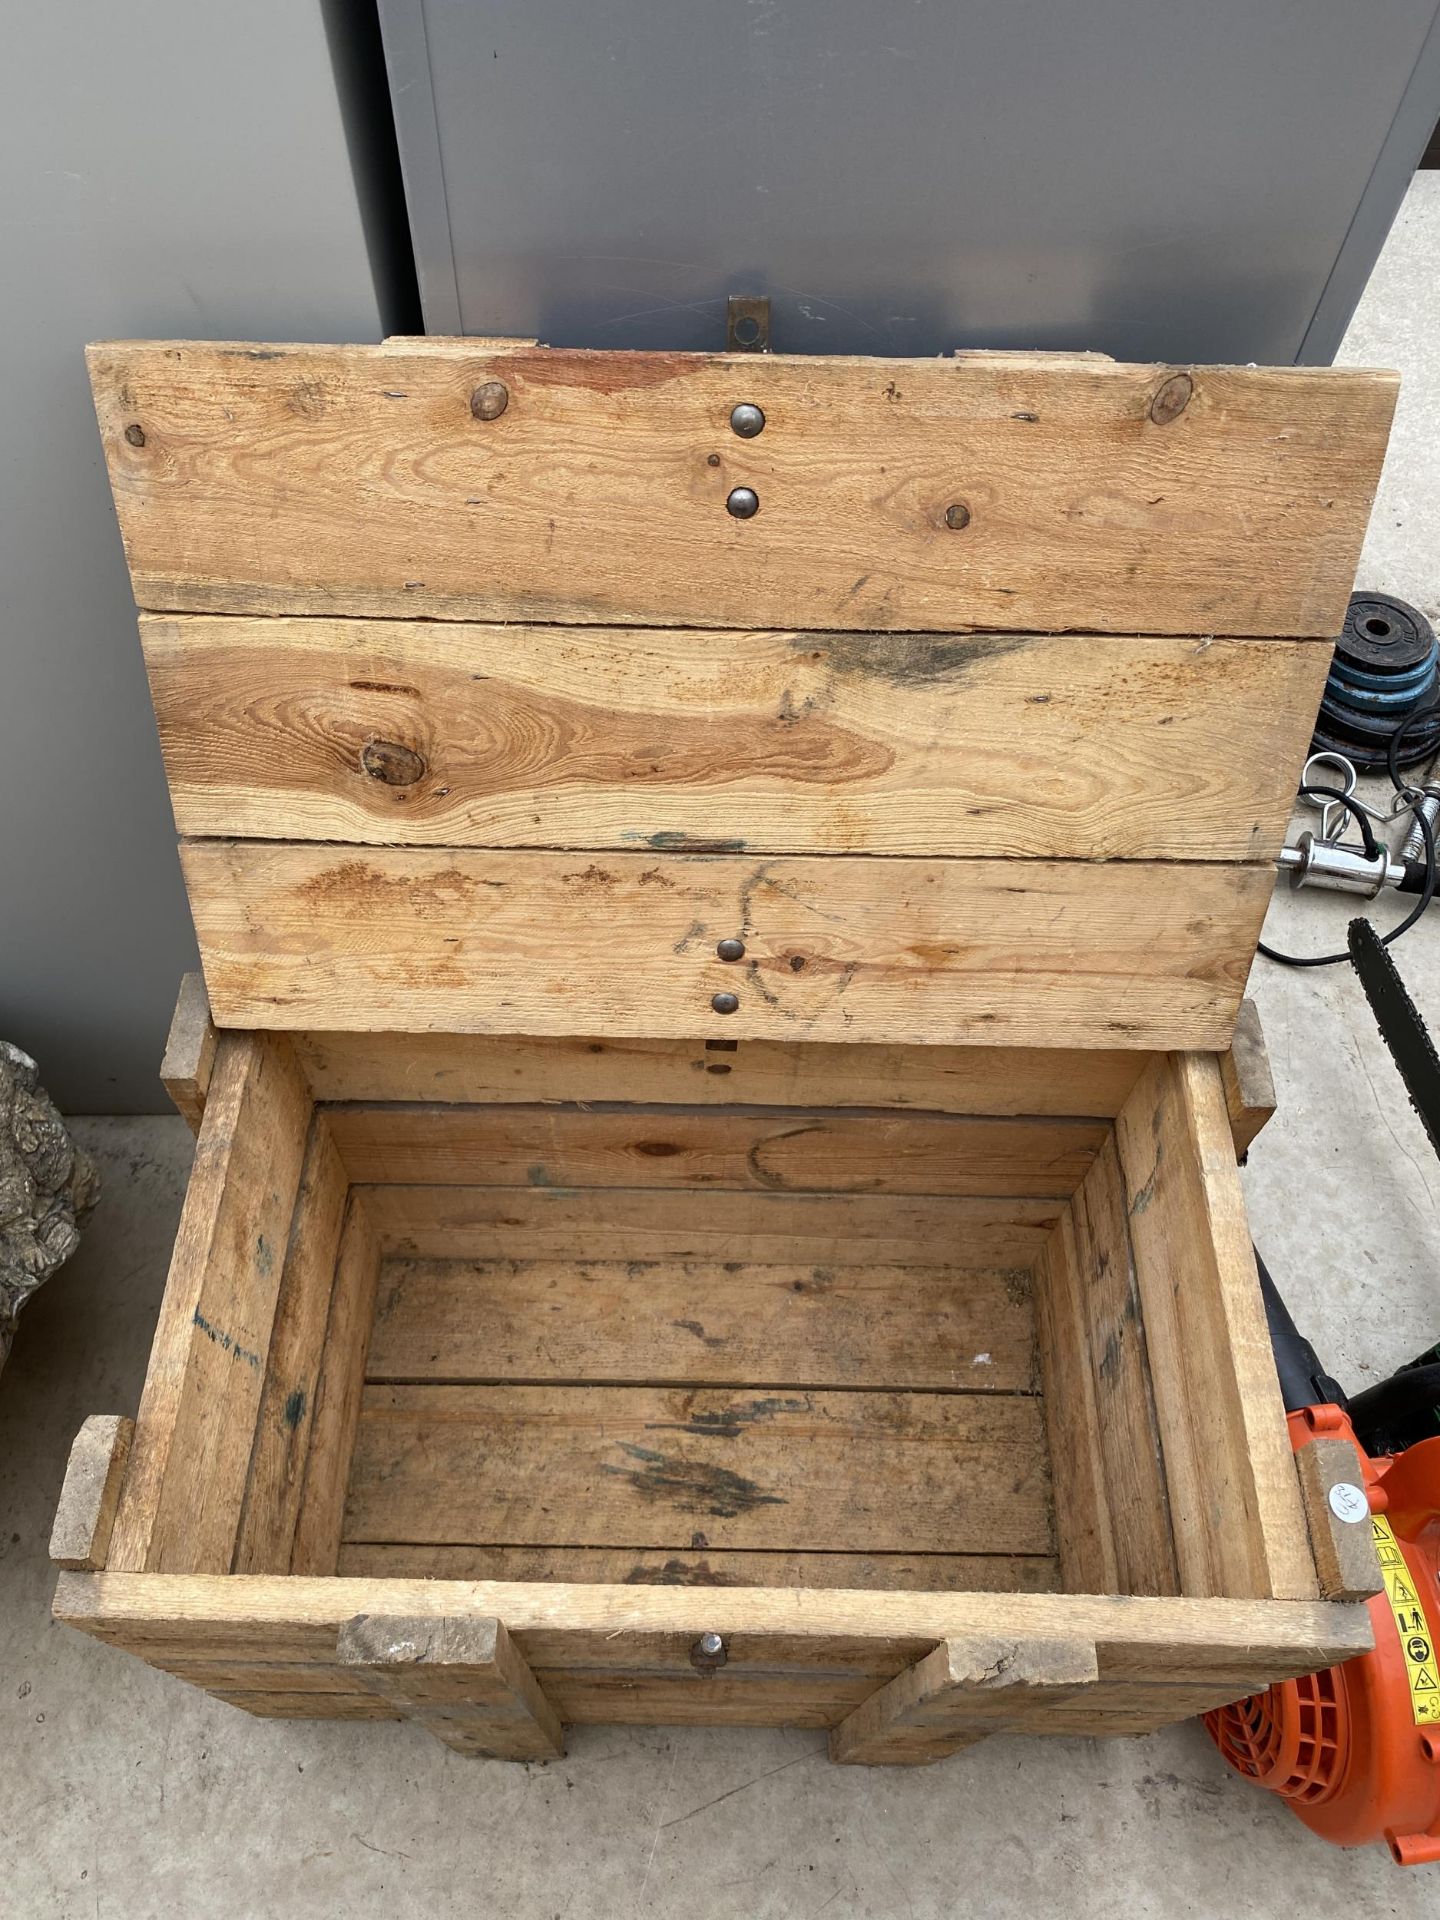 A WOODEN STOARGE CRATE WITH BOLT DOWN REMOVEABLE LID - Image 3 of 7